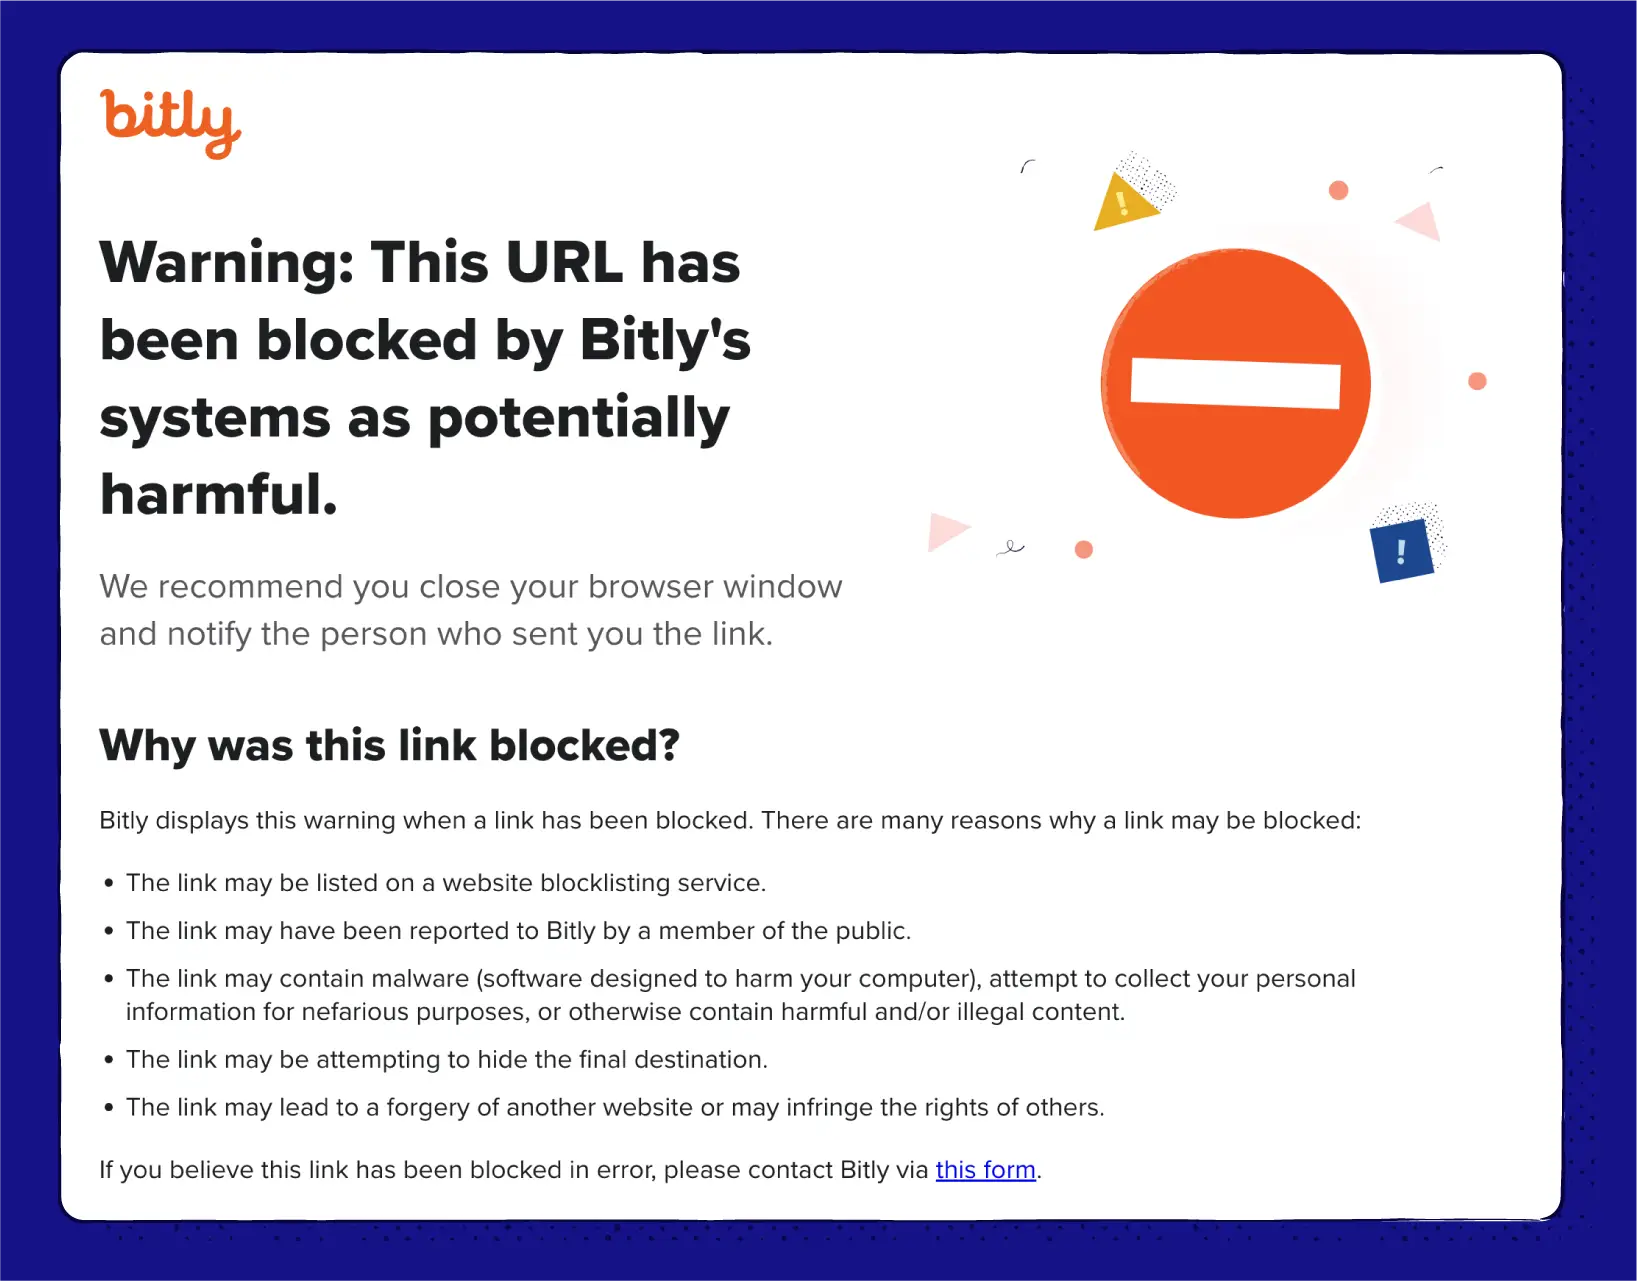 Bitly's warning webpage for a harmful link that has been blocked.